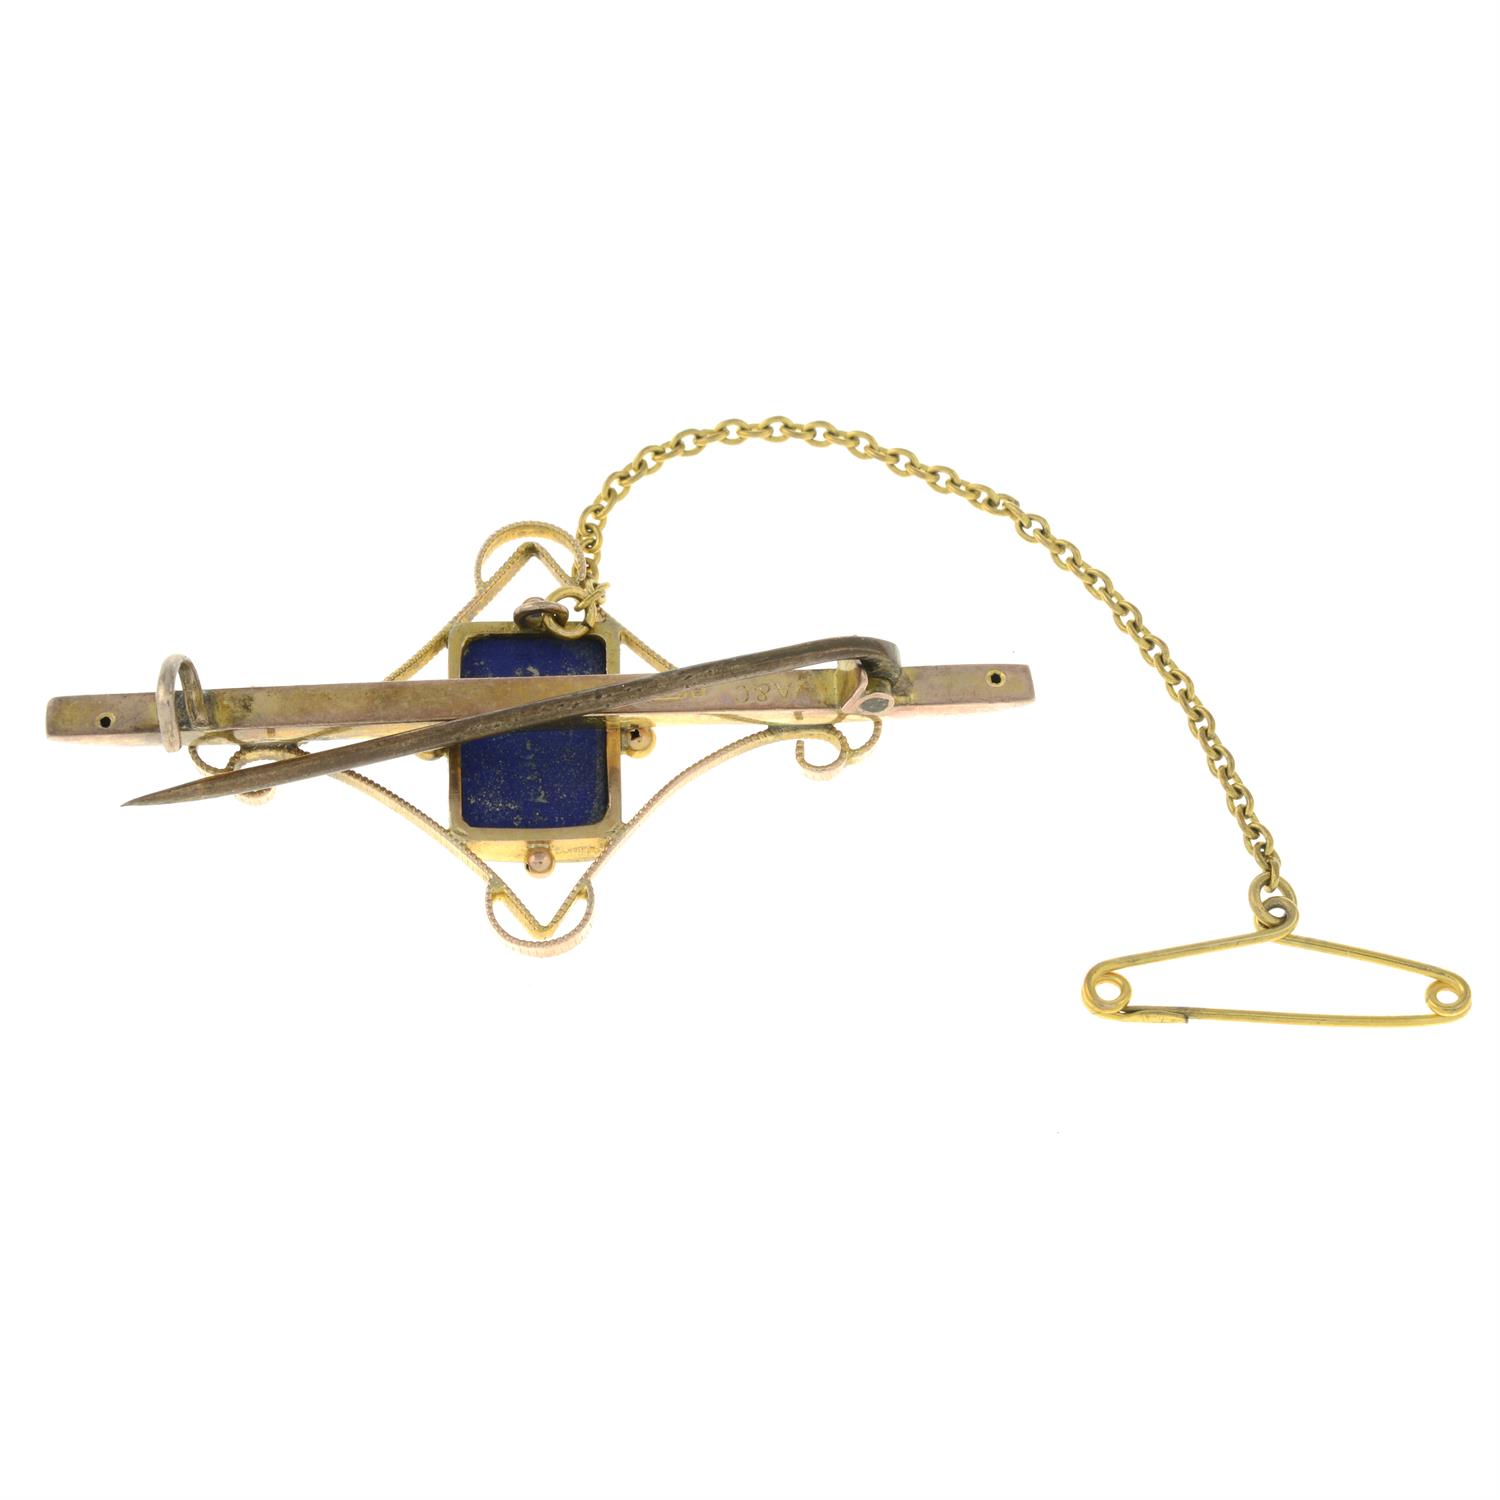 An early 20th century 9ct gold blue jasperware Wedgwood bar brooch. - Image 2 of 2